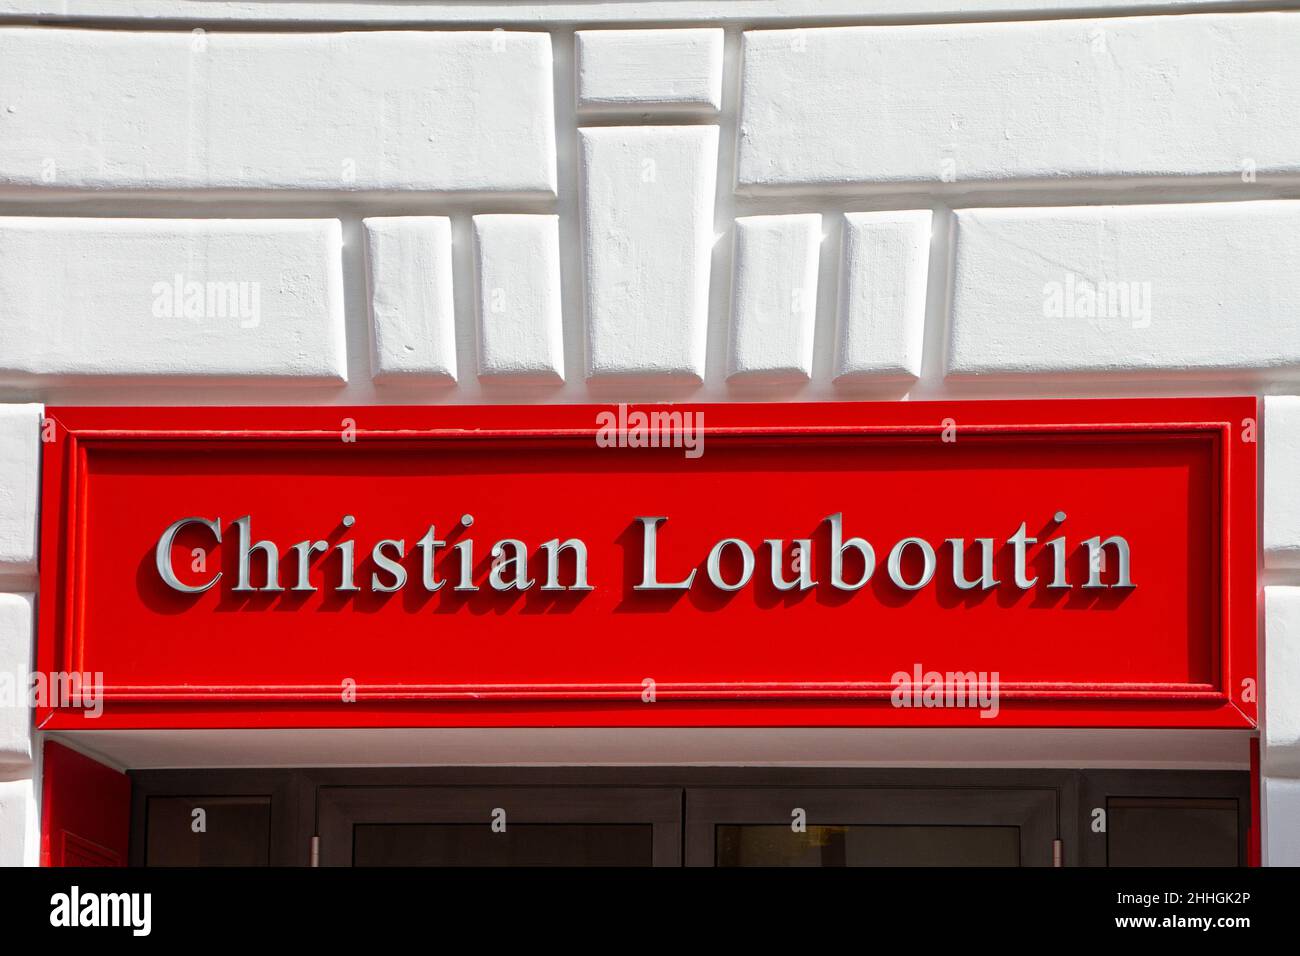 Christian Louboutin High Resolution Stock Photography and Images - Alamy